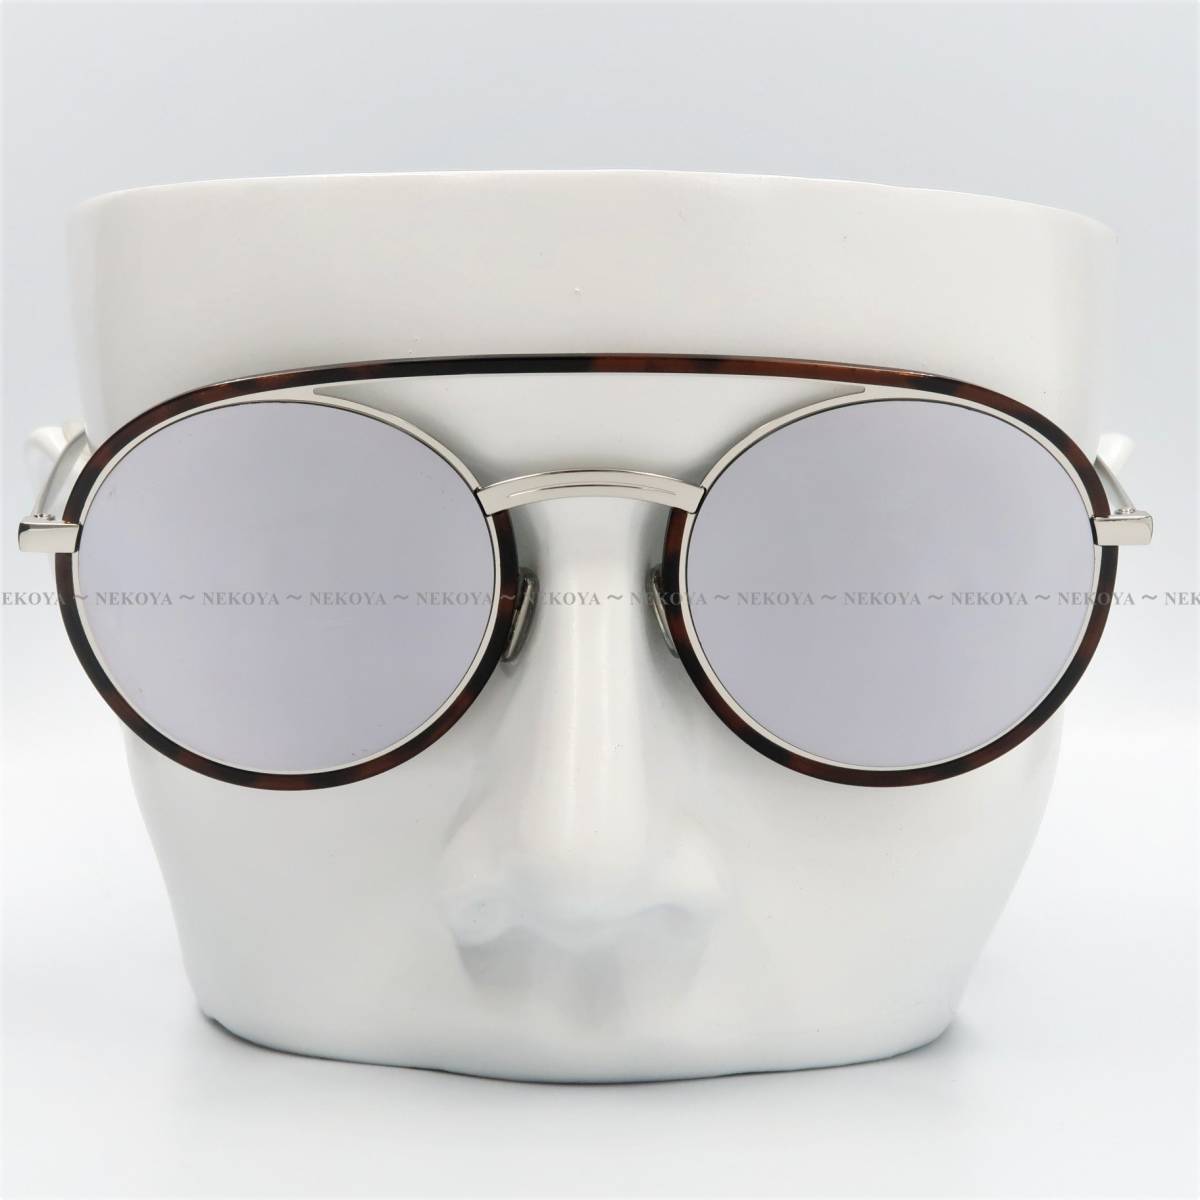 DIOR HOMME DIORSYNTHESIS sunglasses Habana . slope wide . Dior Homme 